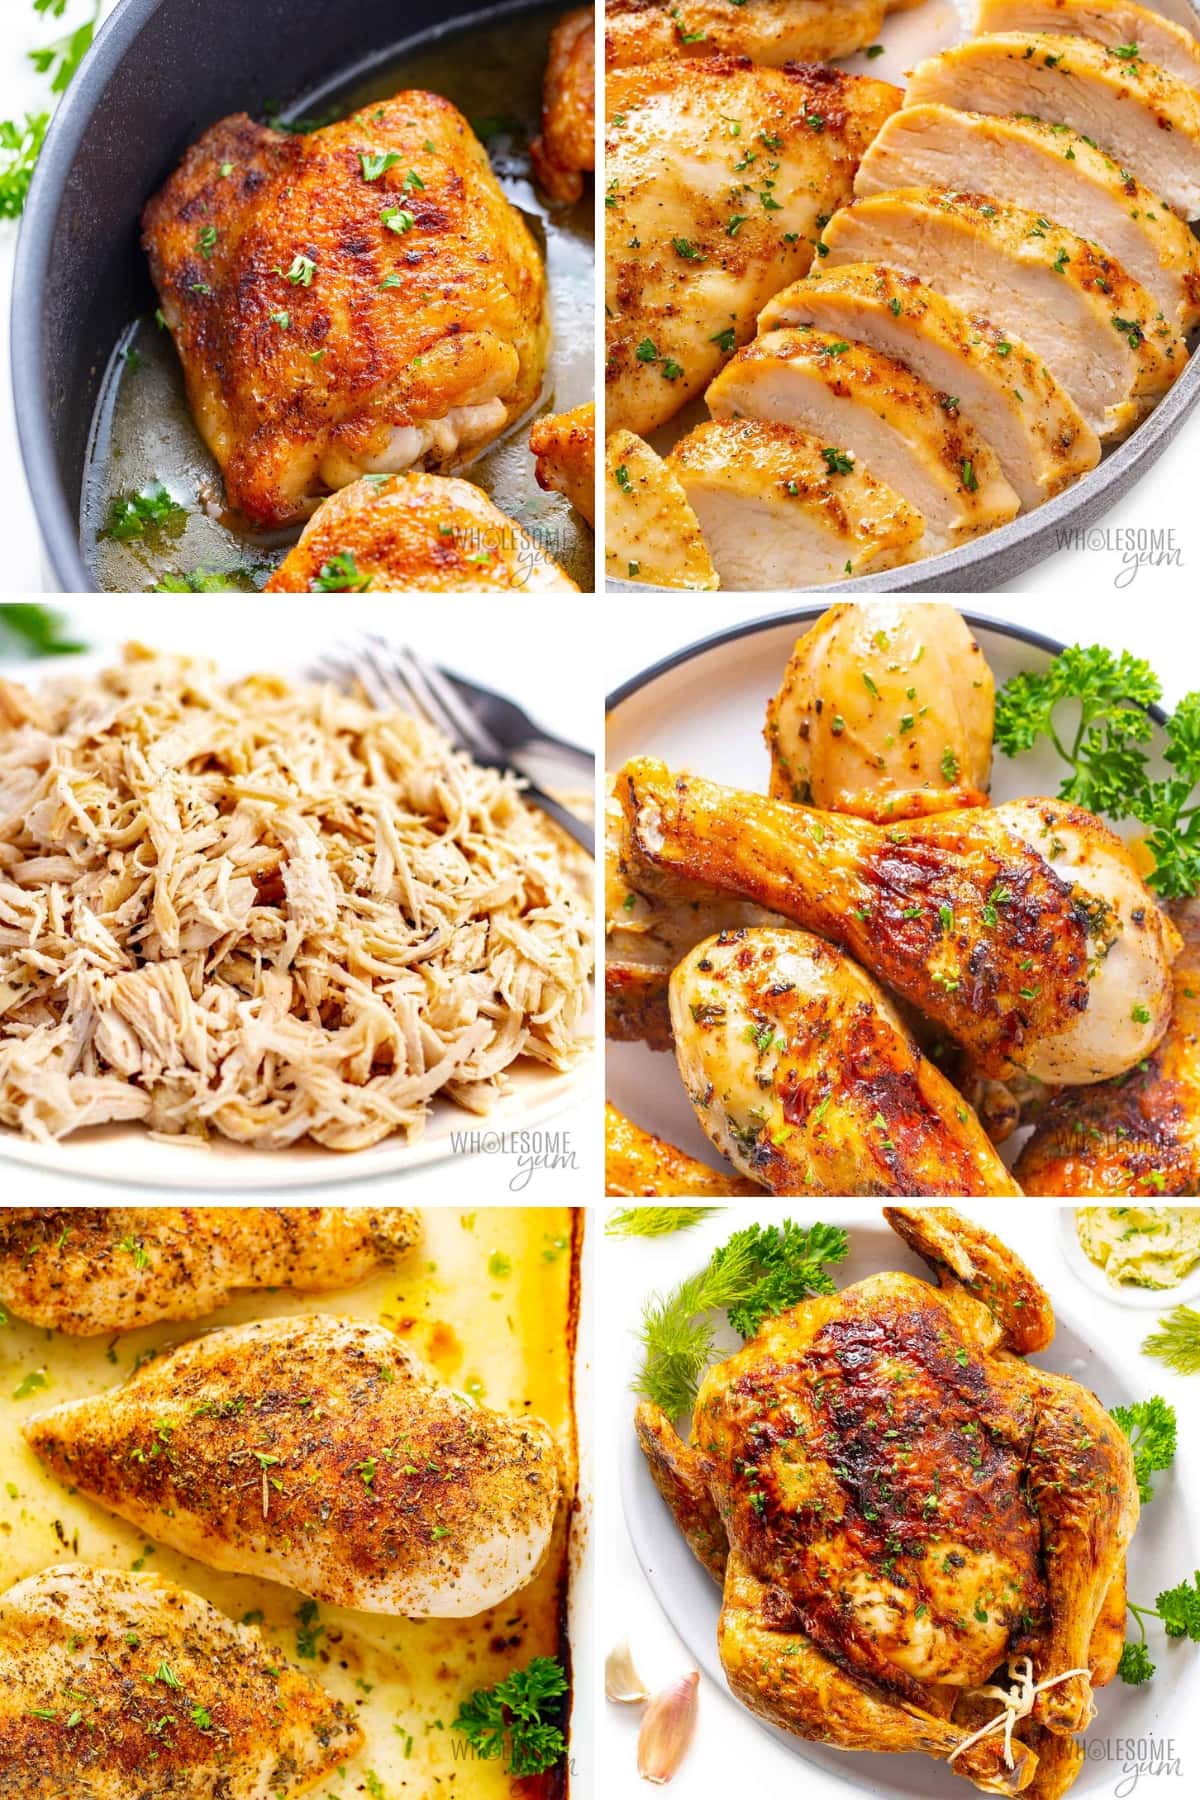 Chicken meal prep ideas collage - different cuts of chicken.